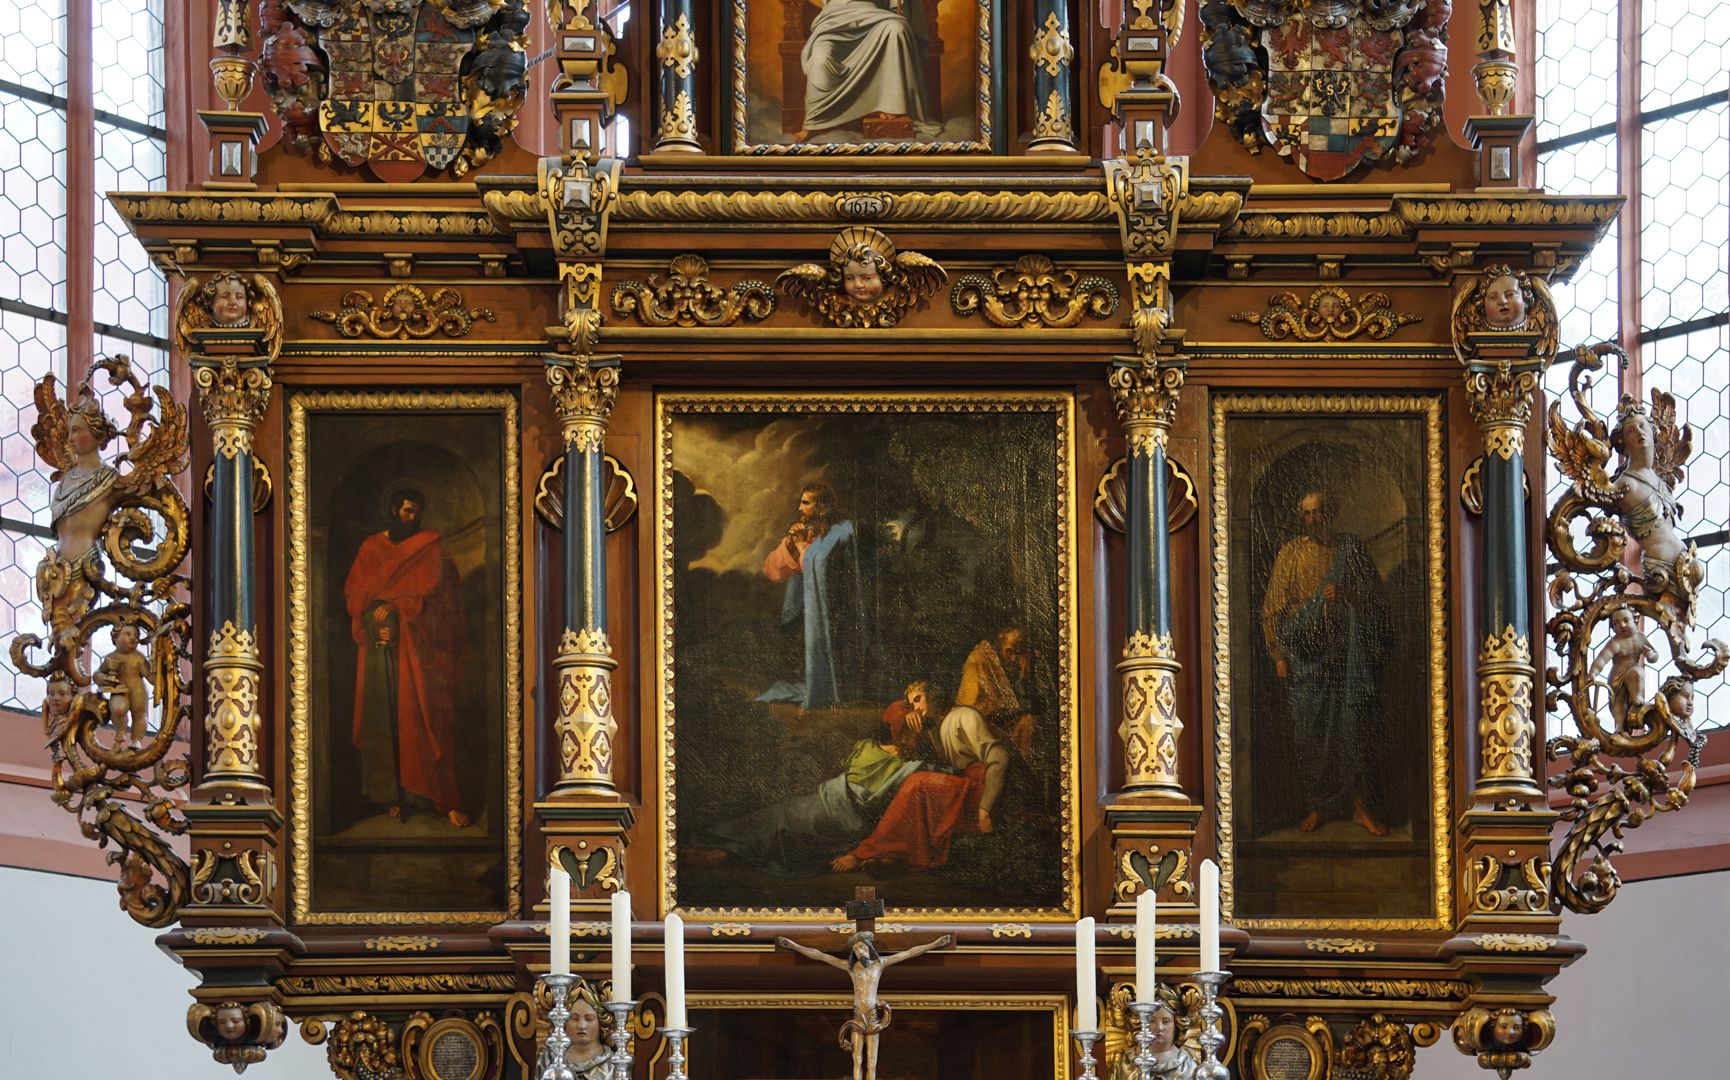 High Altar Altar panels, paintings by August Riedel, 1821/22